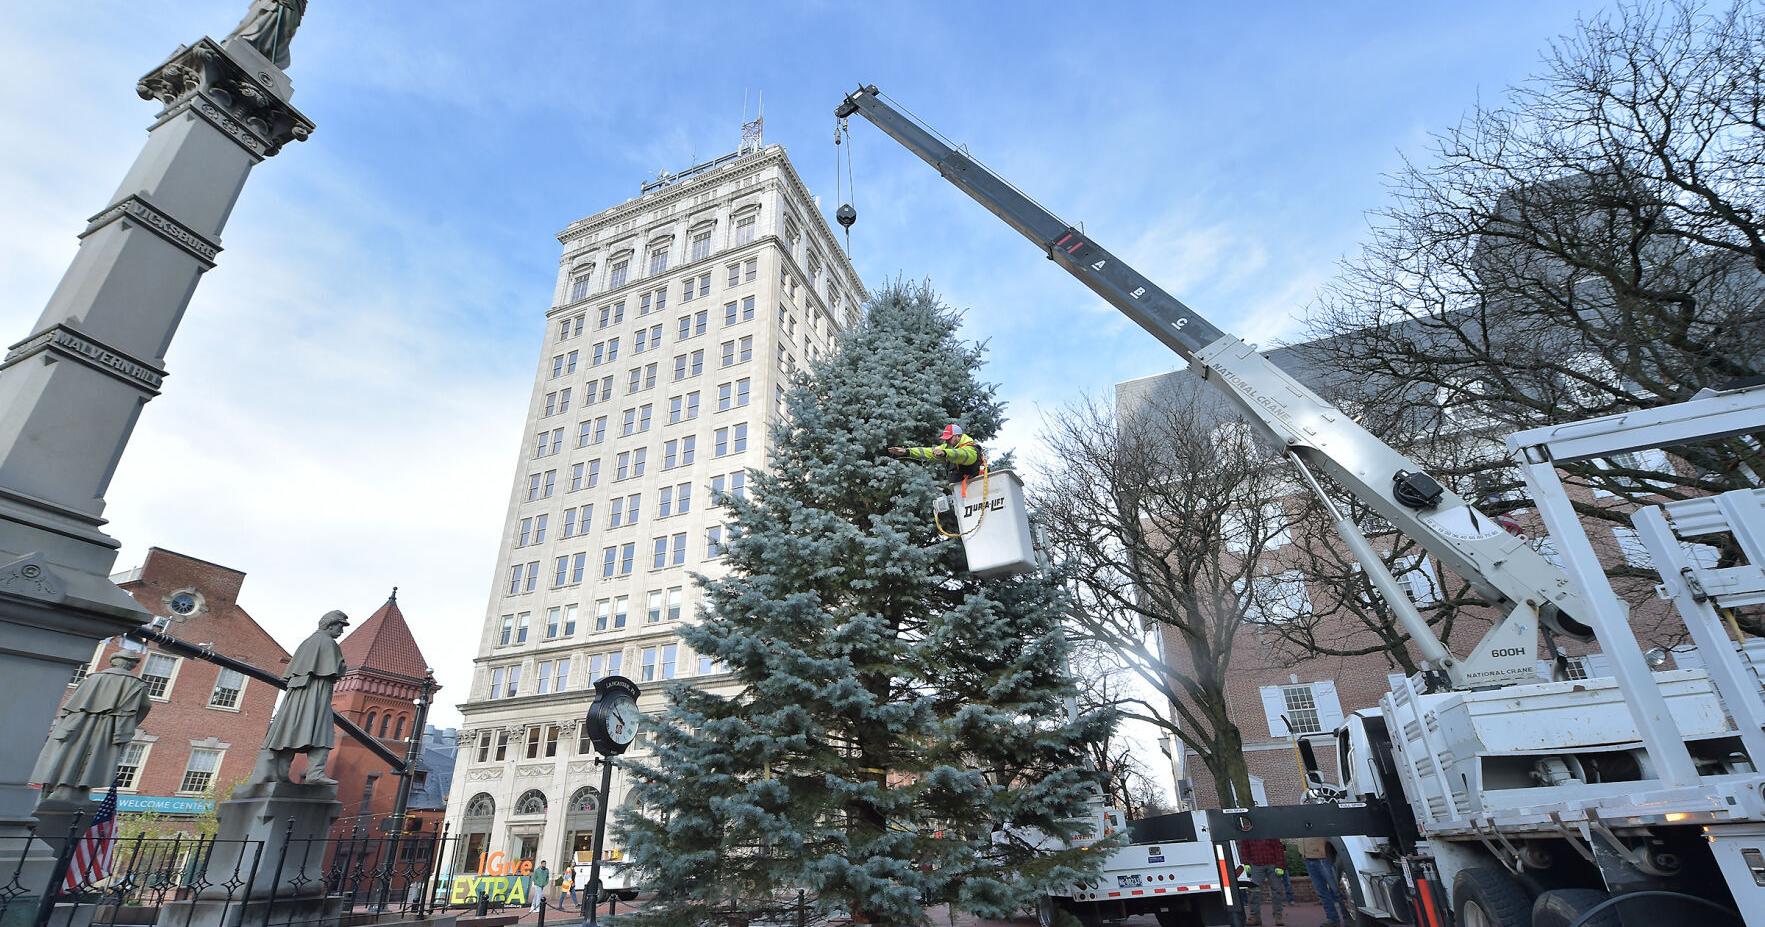 Christmas tree arrives in downtown Lancaster city [photos]